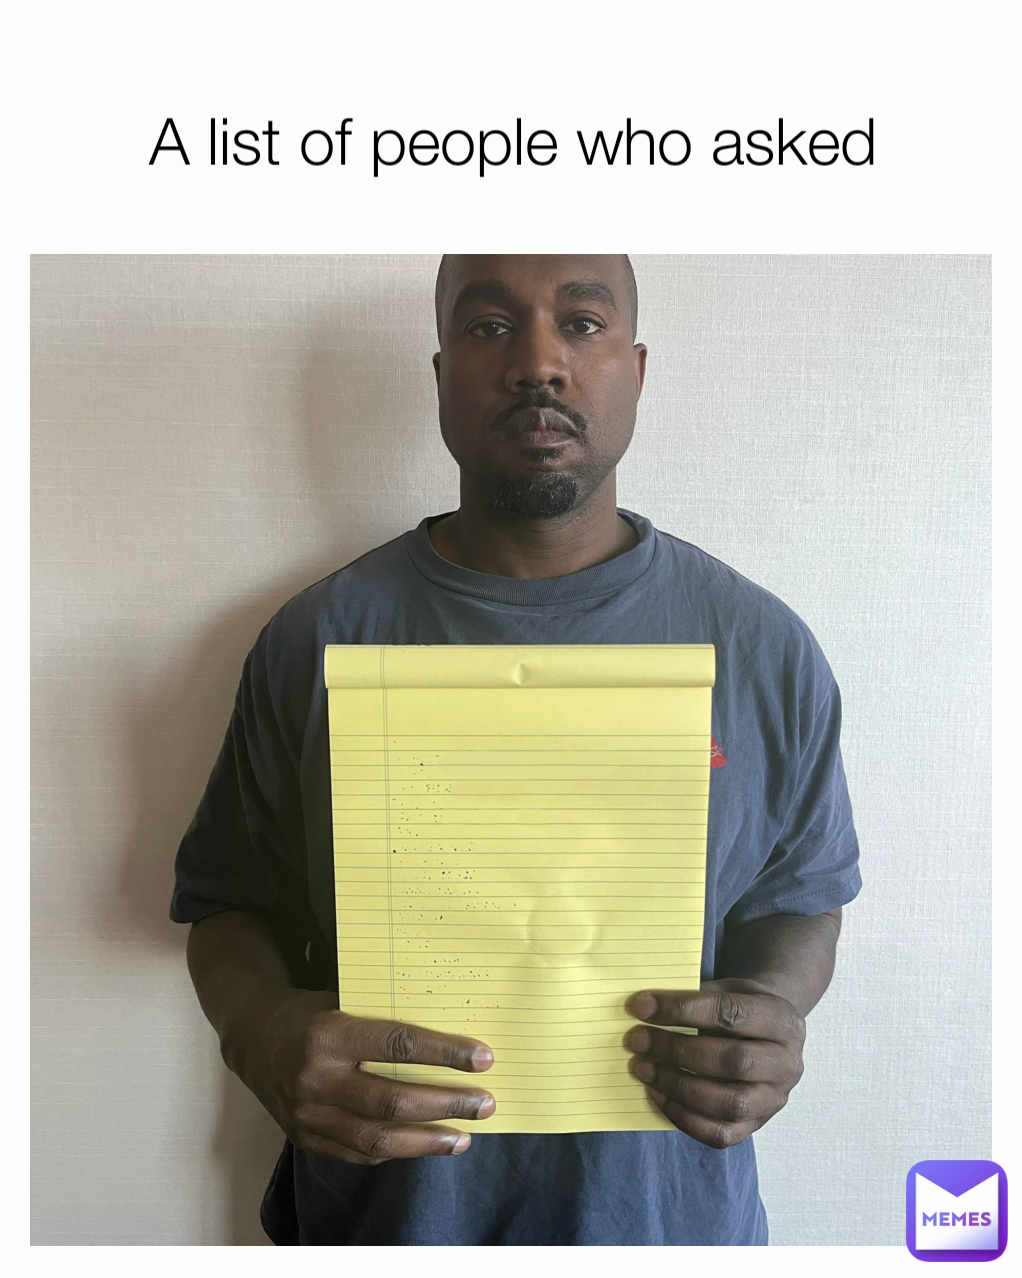 A list of people who asked